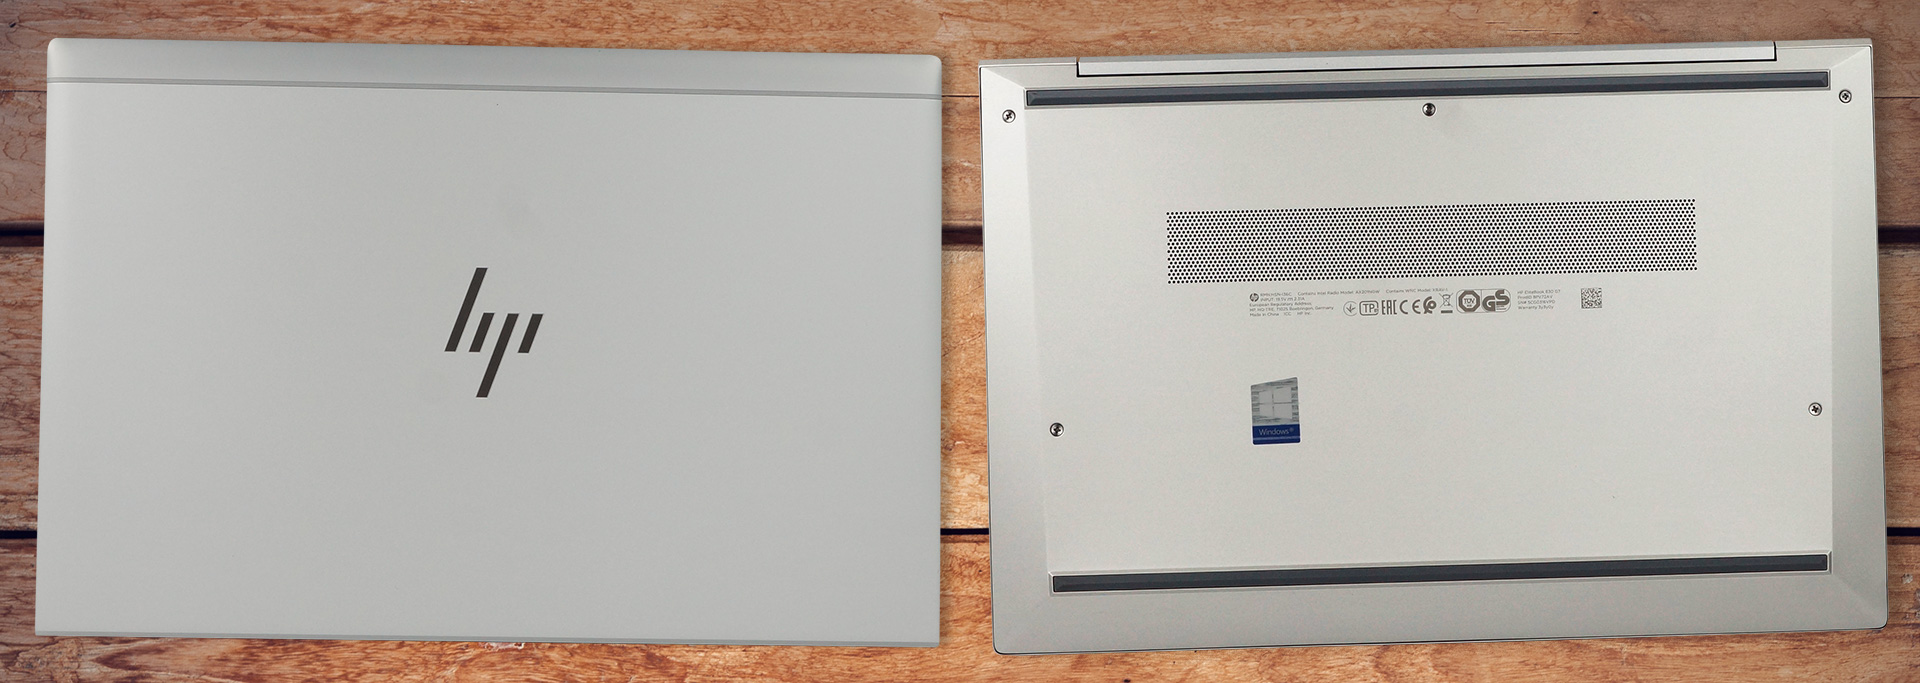 HP EliteBook 830 G7 review - forgot your charger? No problem!